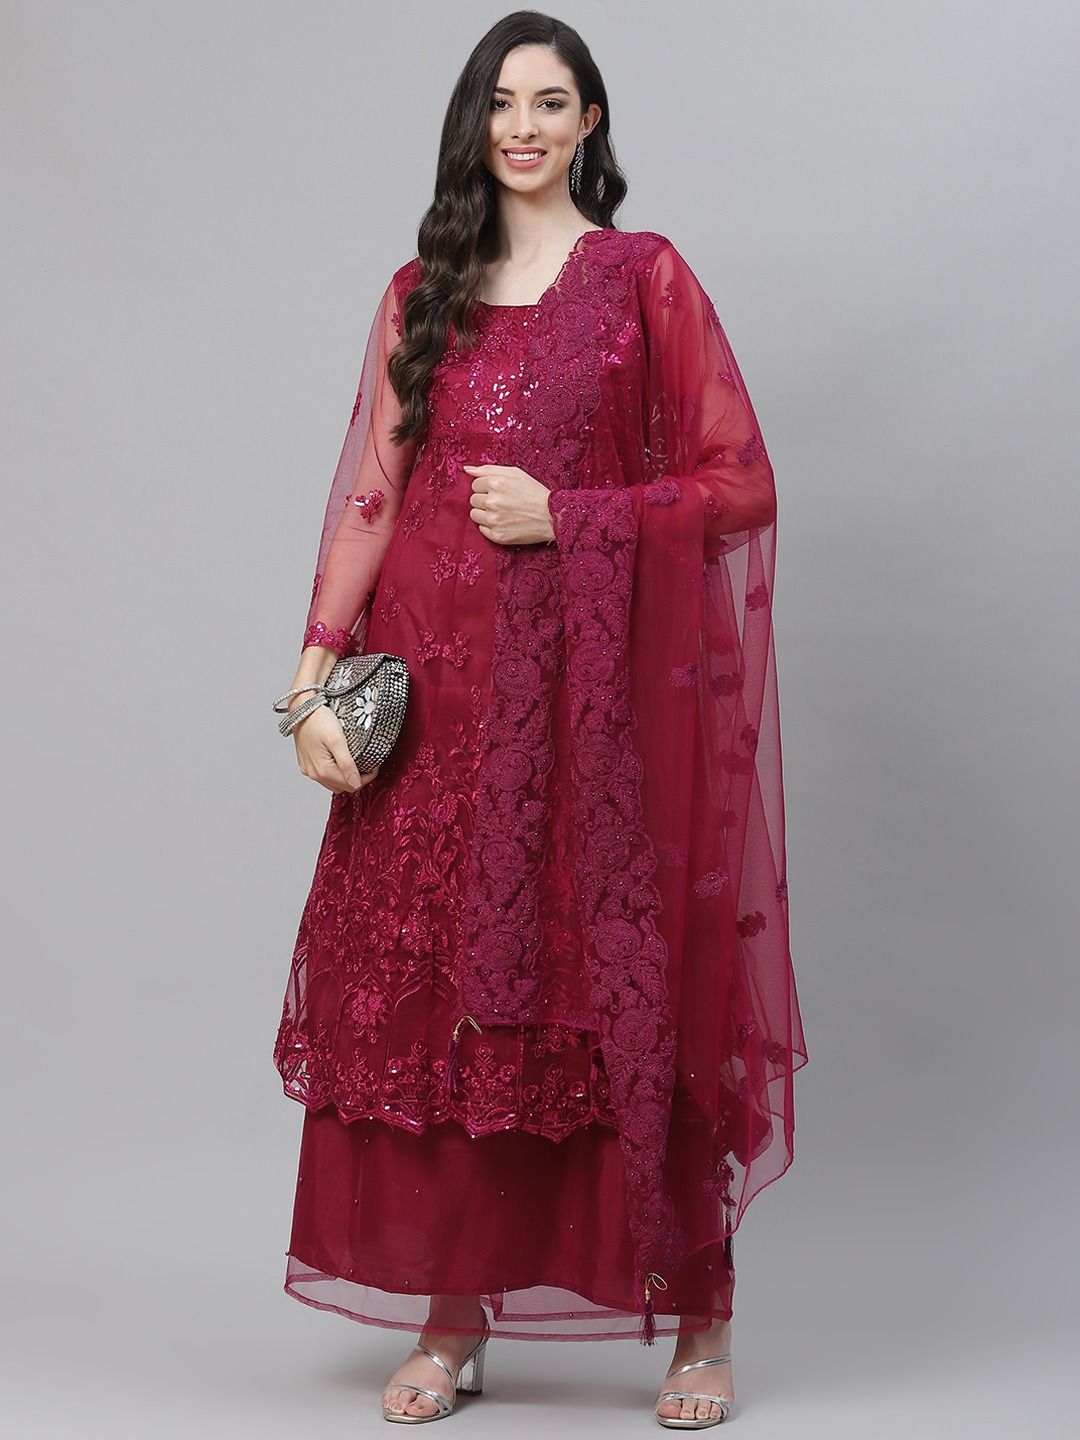 Net Fabric Pink Colour Kurta with Skirt & Dupatta in Embroidered, Resham,  Beads & Sequence work